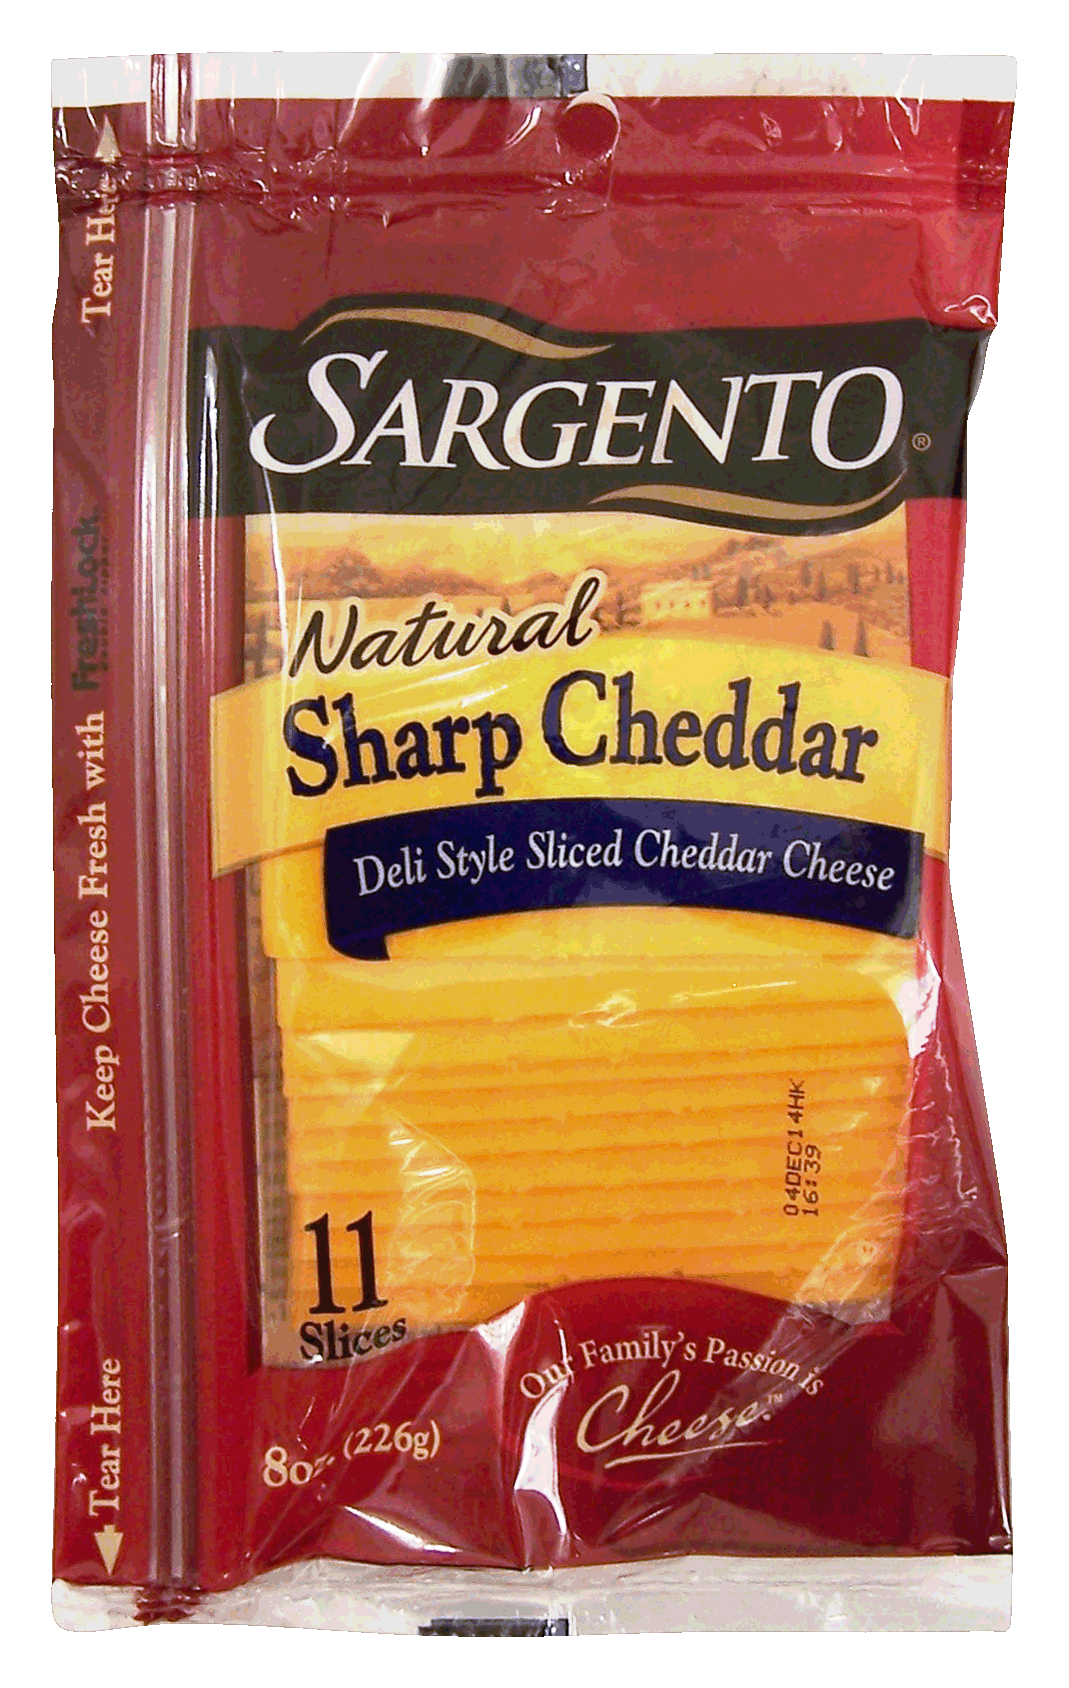 Sargento(R) Natural Deli Style Sharp Cheddar Thin Slices 11 Ct Full-Size Picture